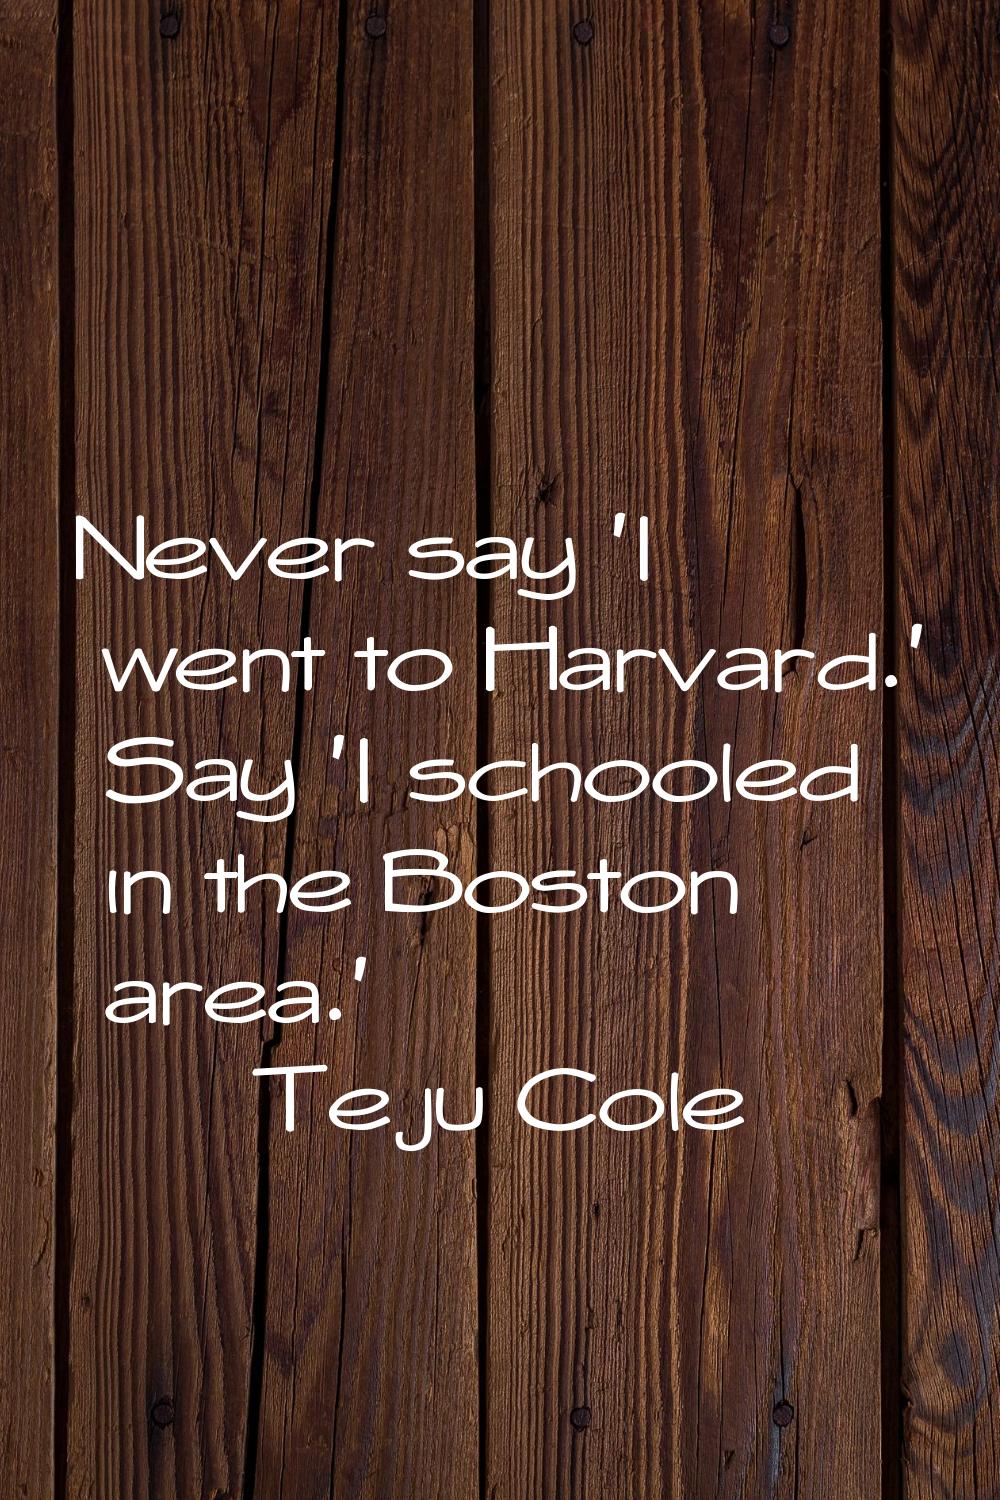 Never say 'I went to Harvard.' Say 'I schooled in the Boston area.'